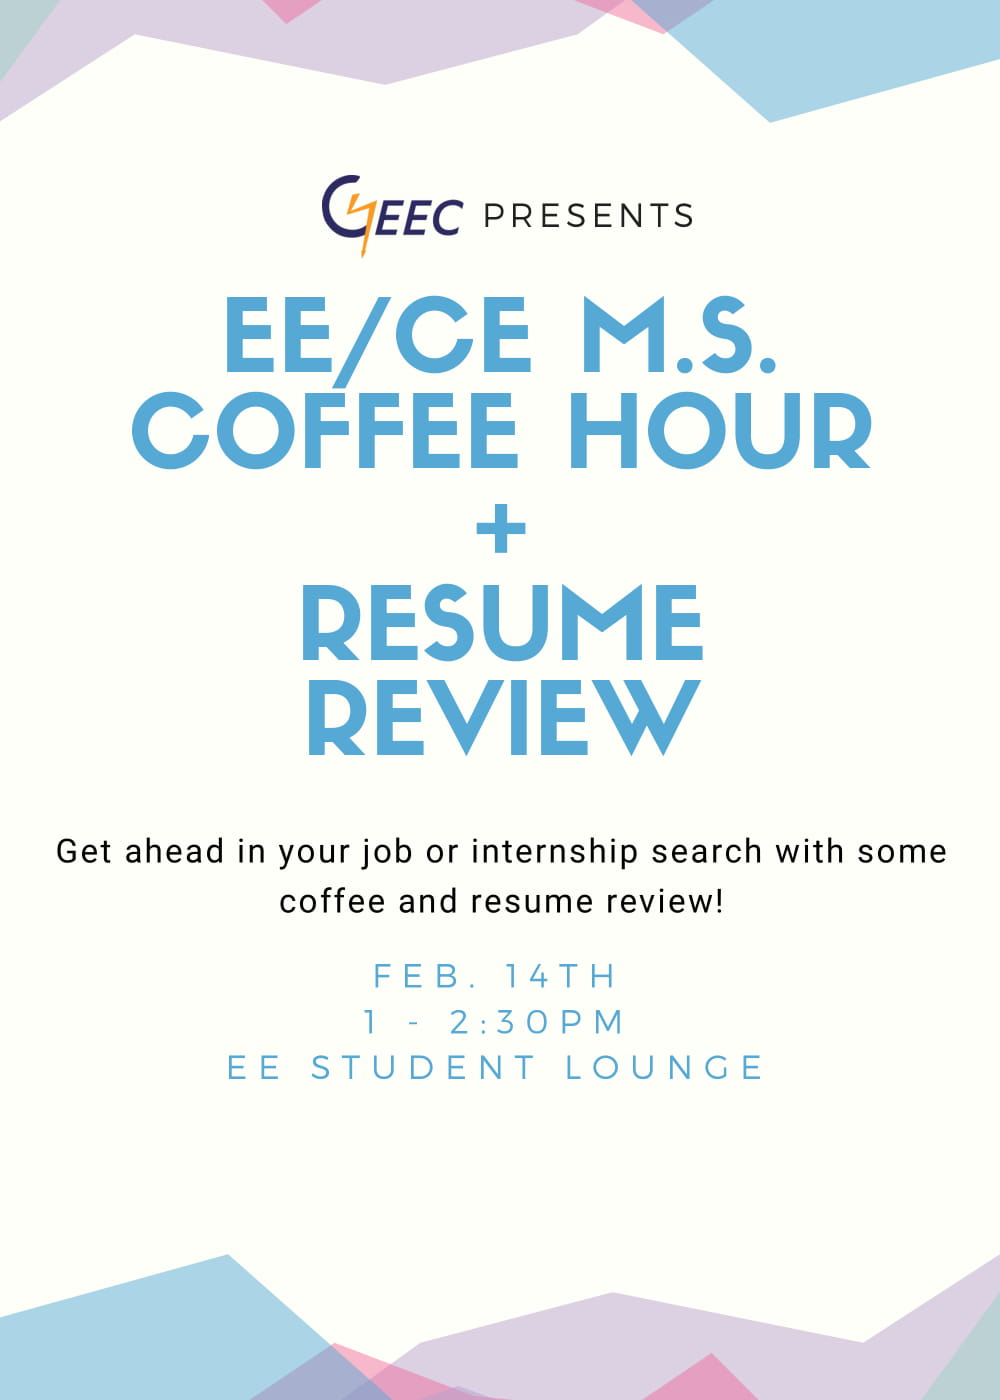 M.S. Coffee Hour + Resume Review Event Flyer